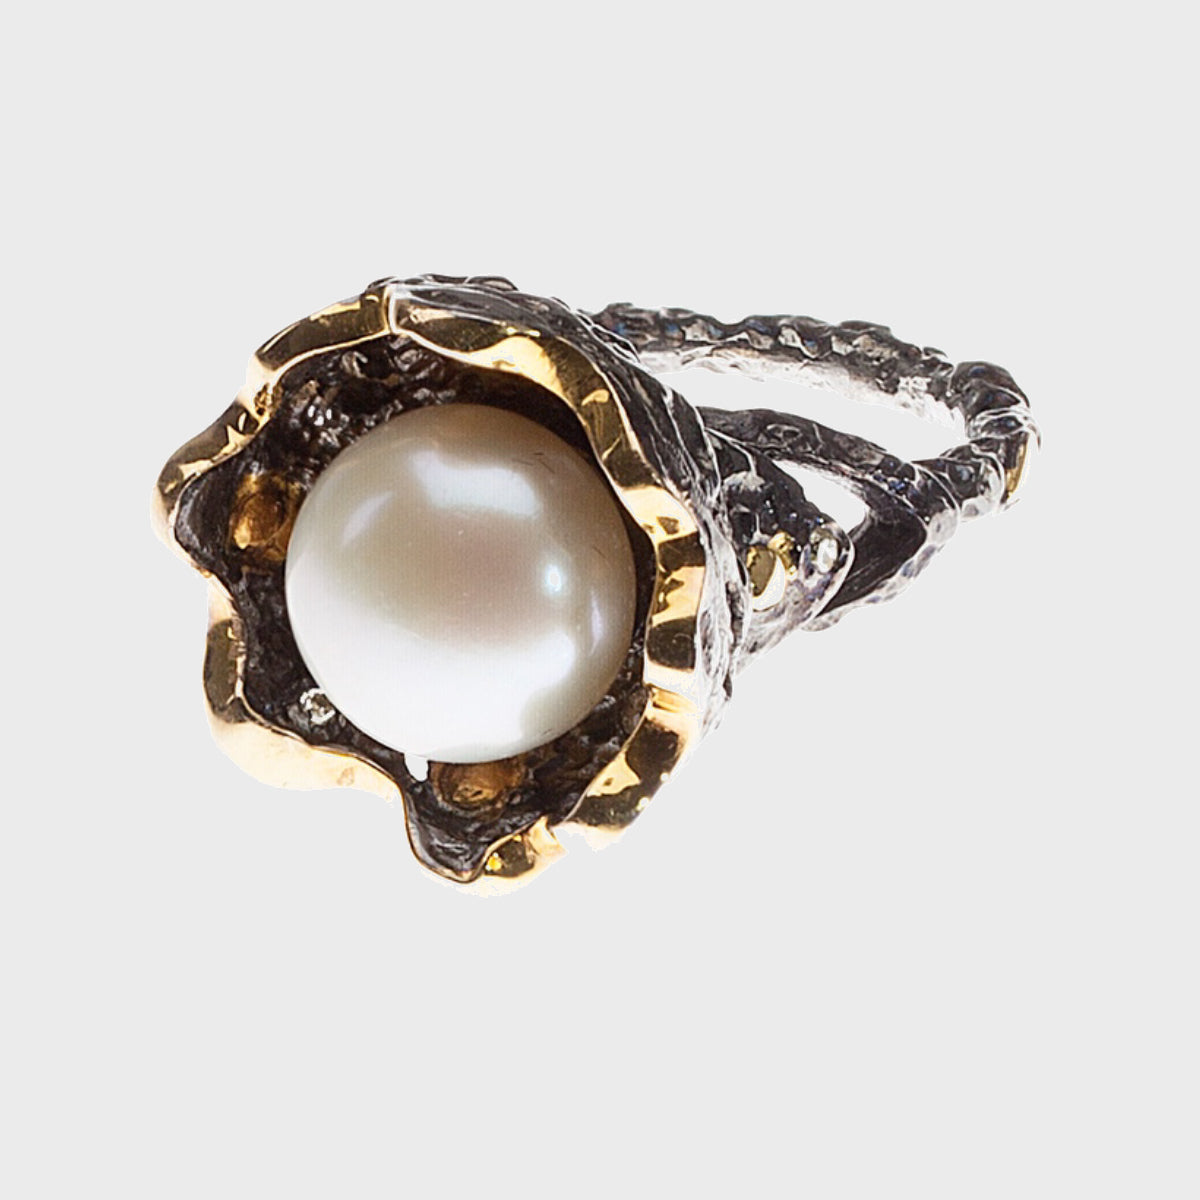 Large Pearl Ring